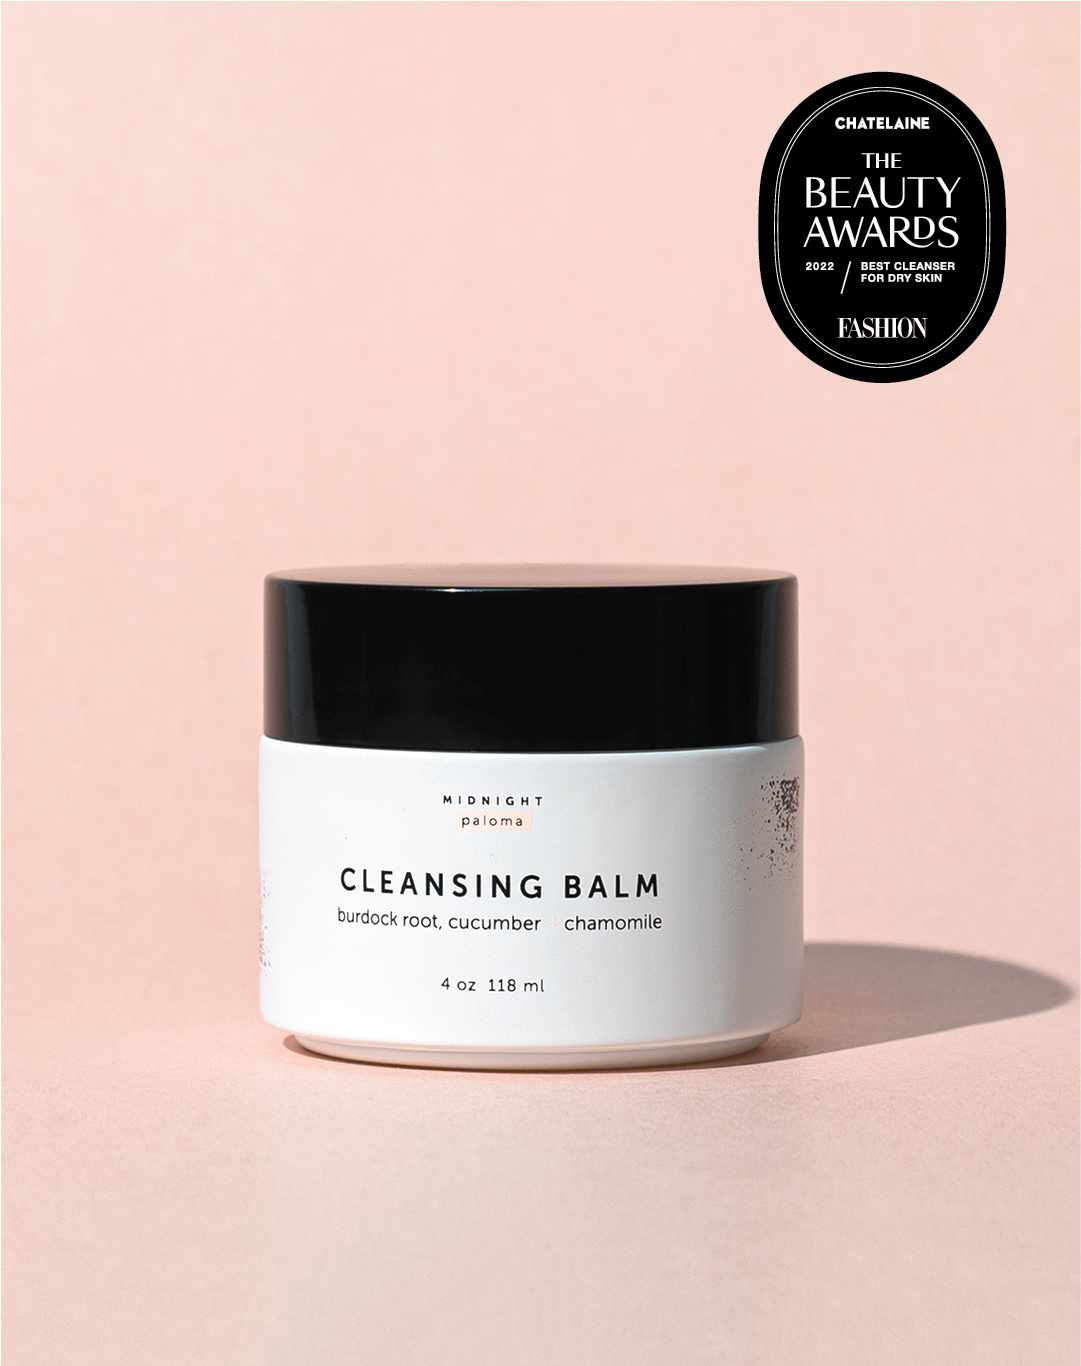 Free Gift - Cleansing Balm